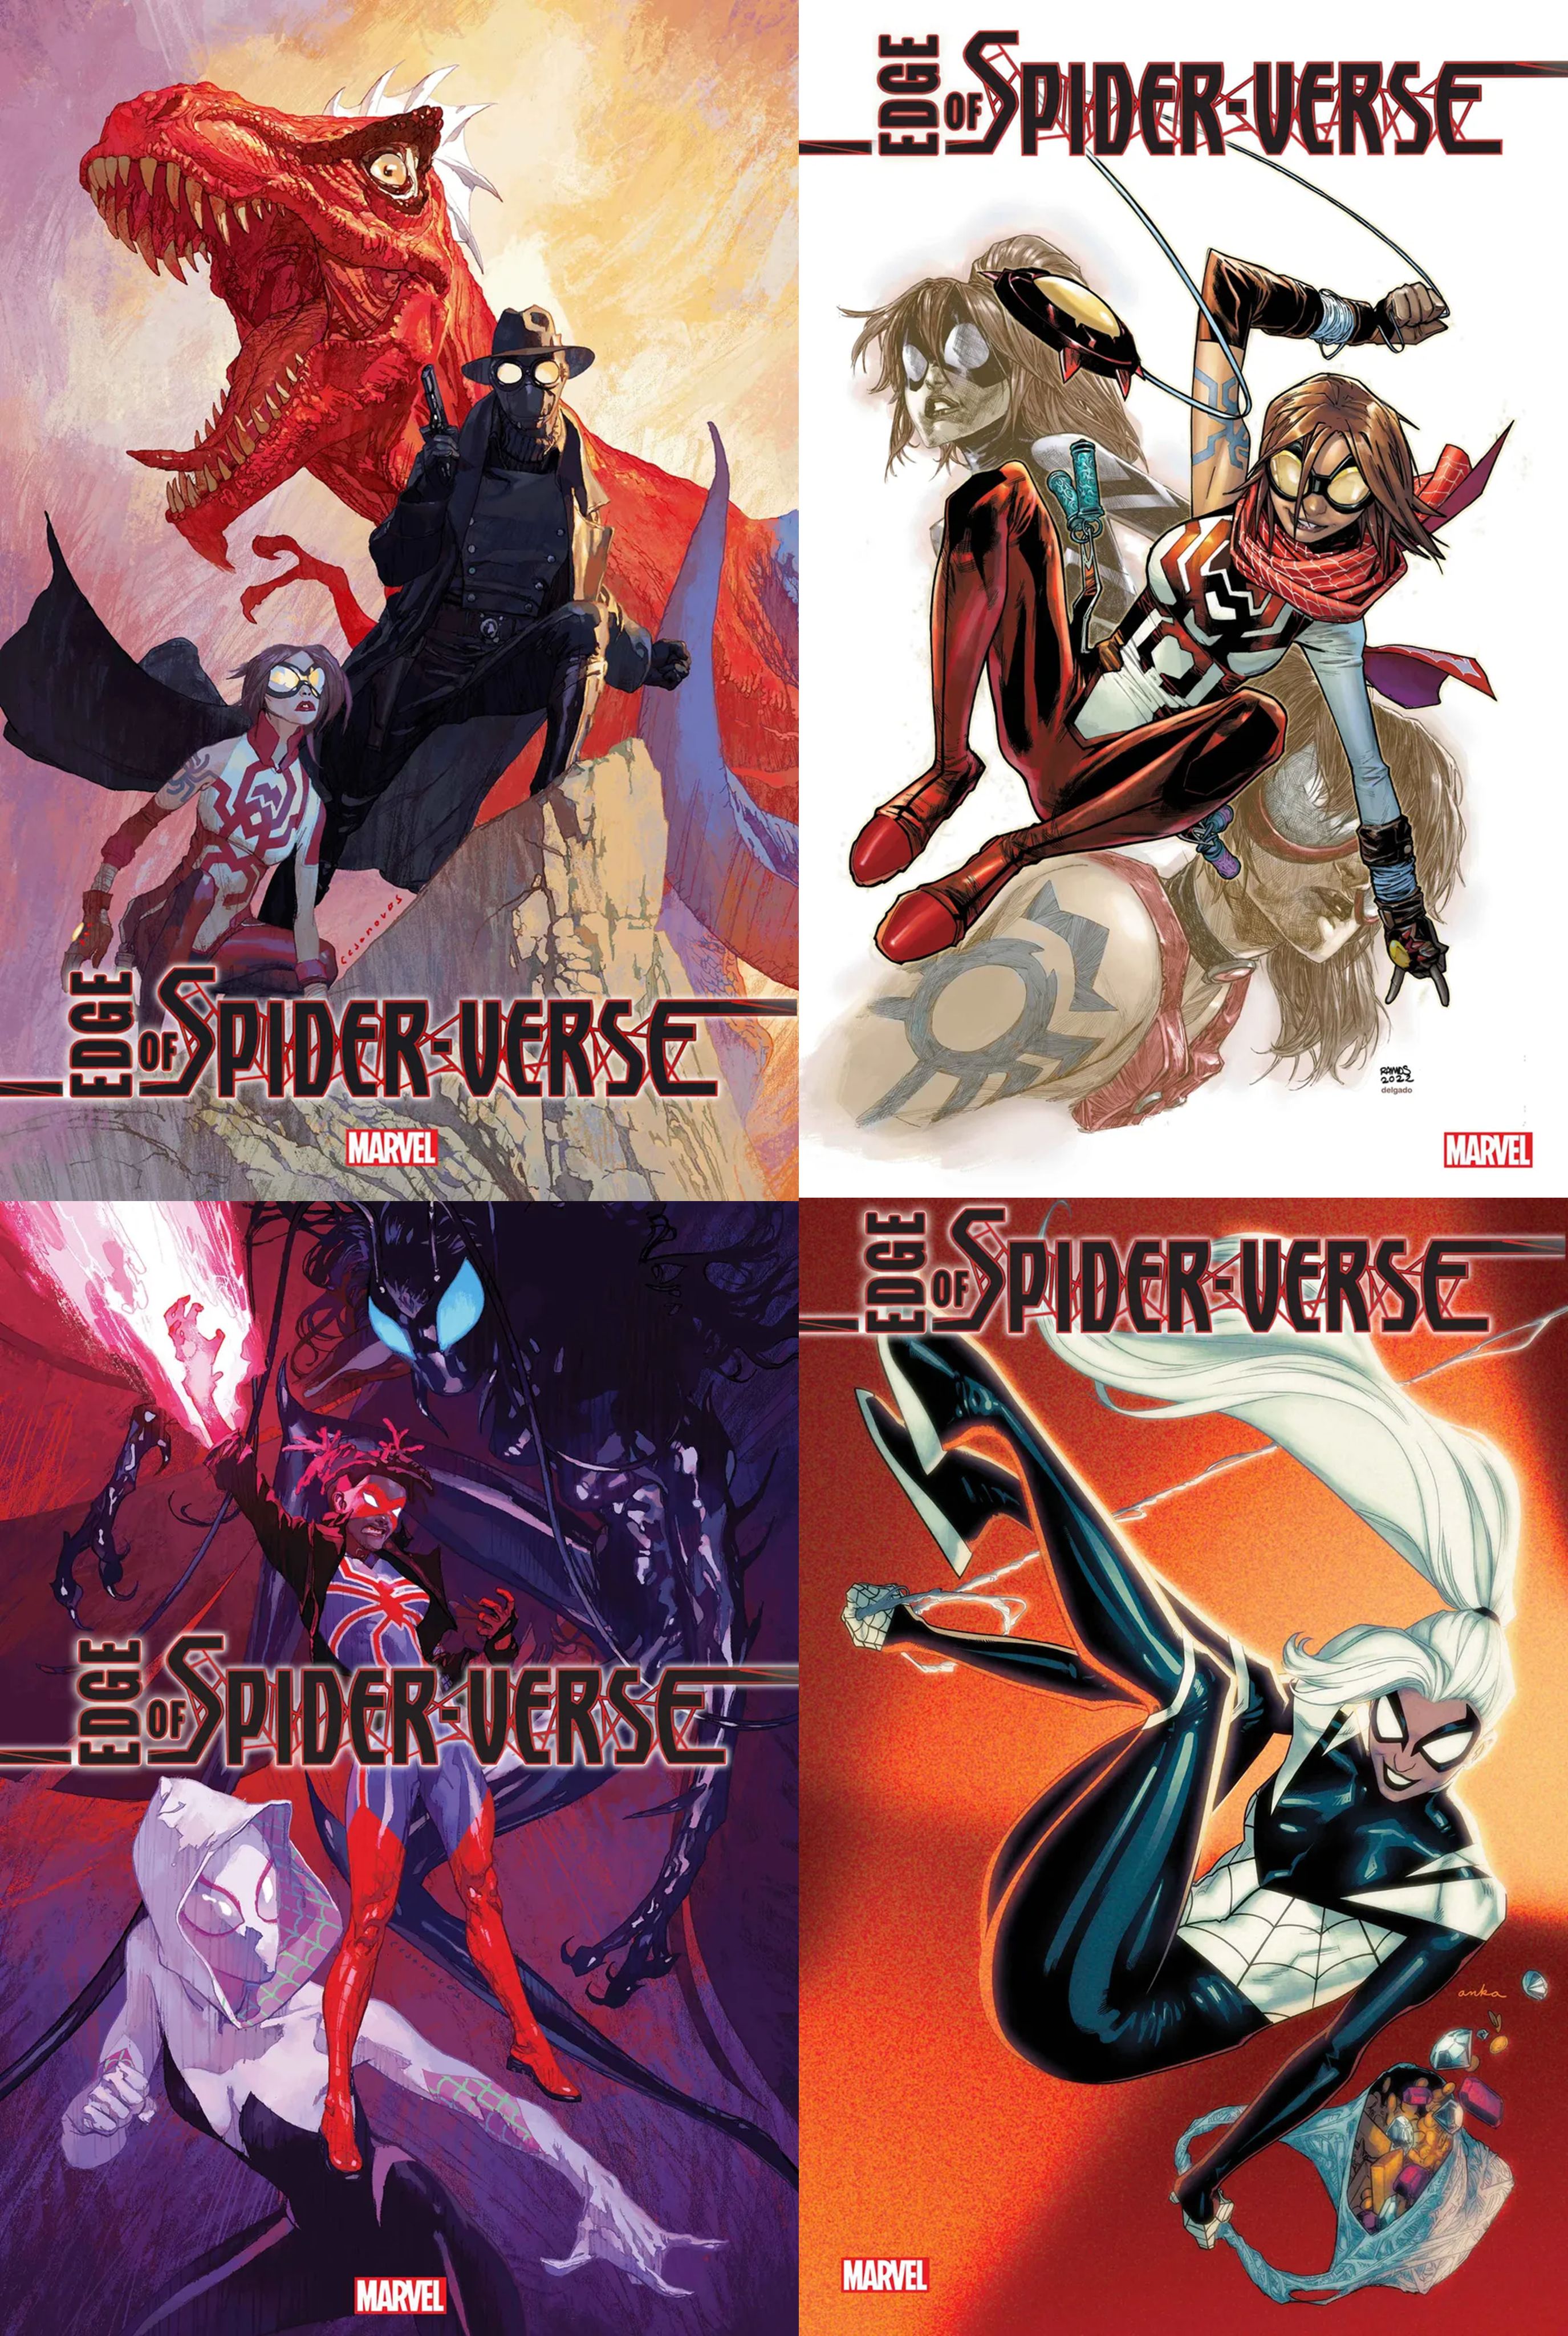 Edge of Spider Verse covers